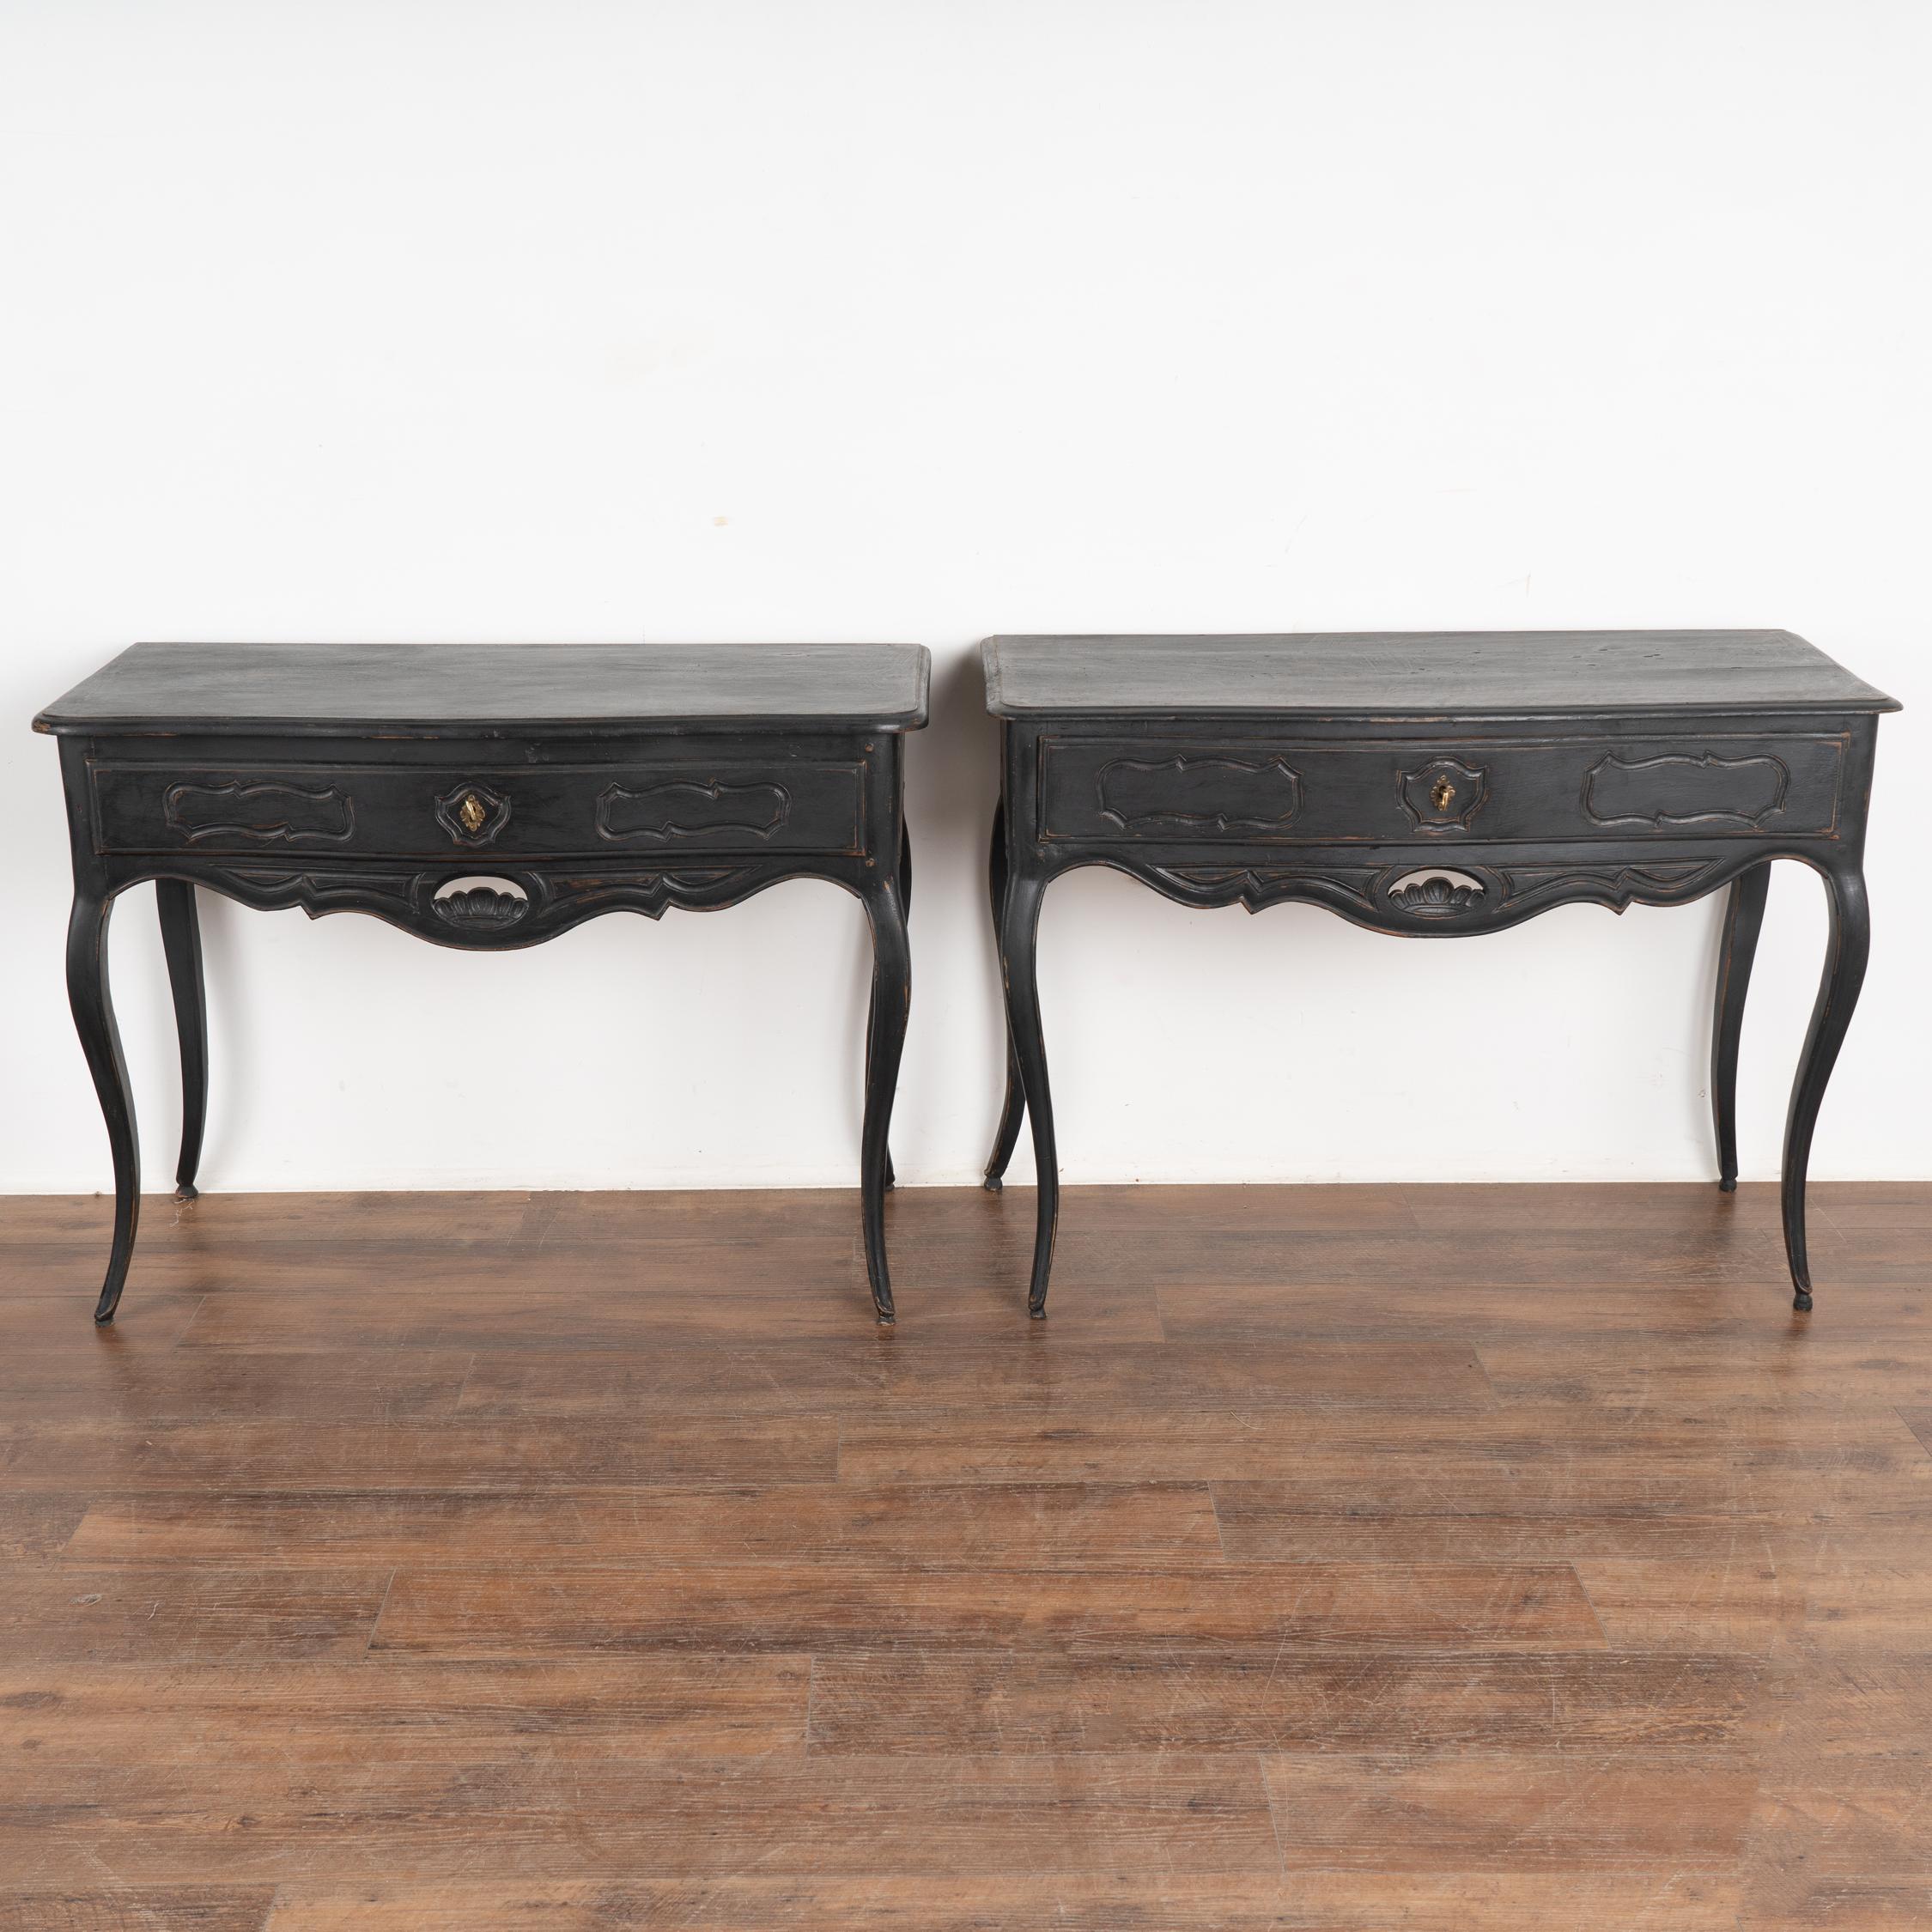 French Pair, Black Carved Side Tables With Cabriolet Legs, France circa 1850-70